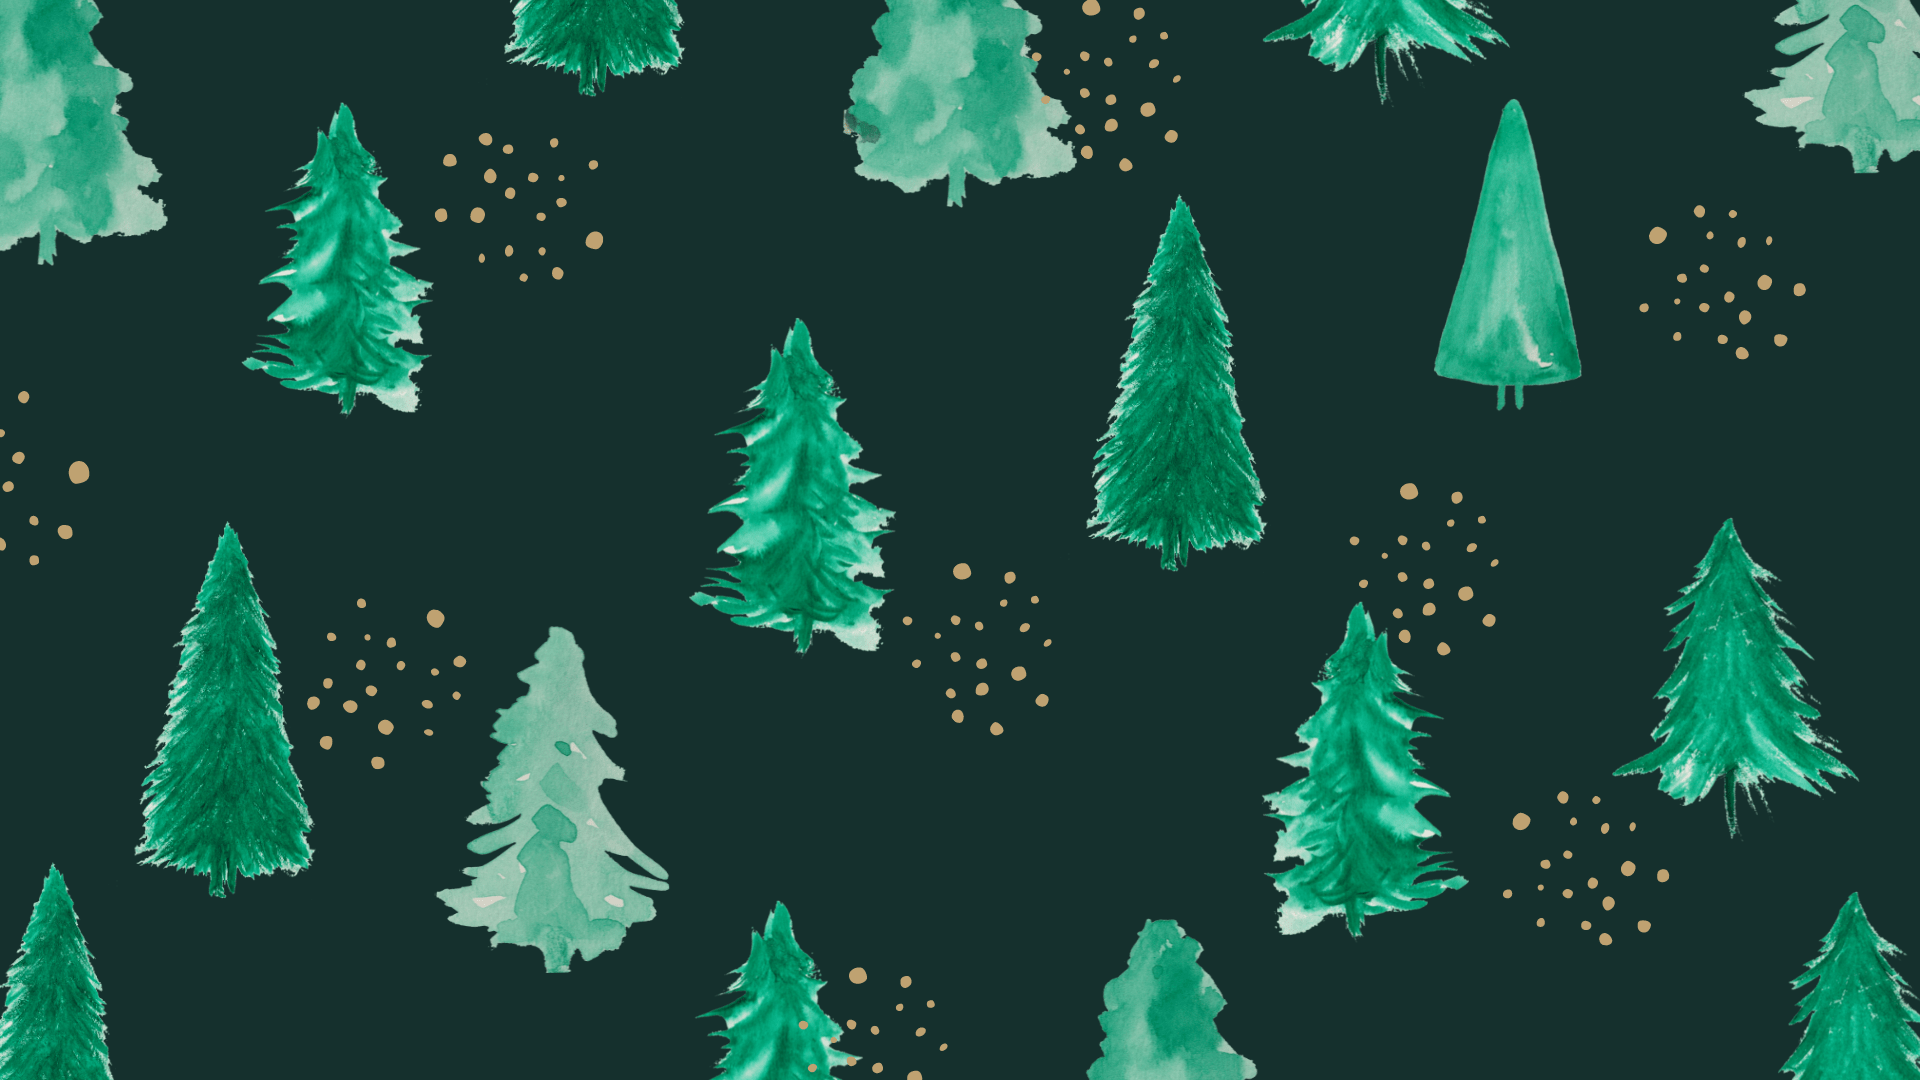 A pattern of green trees and gold stars - Desktop, Christmas, cute Christmas